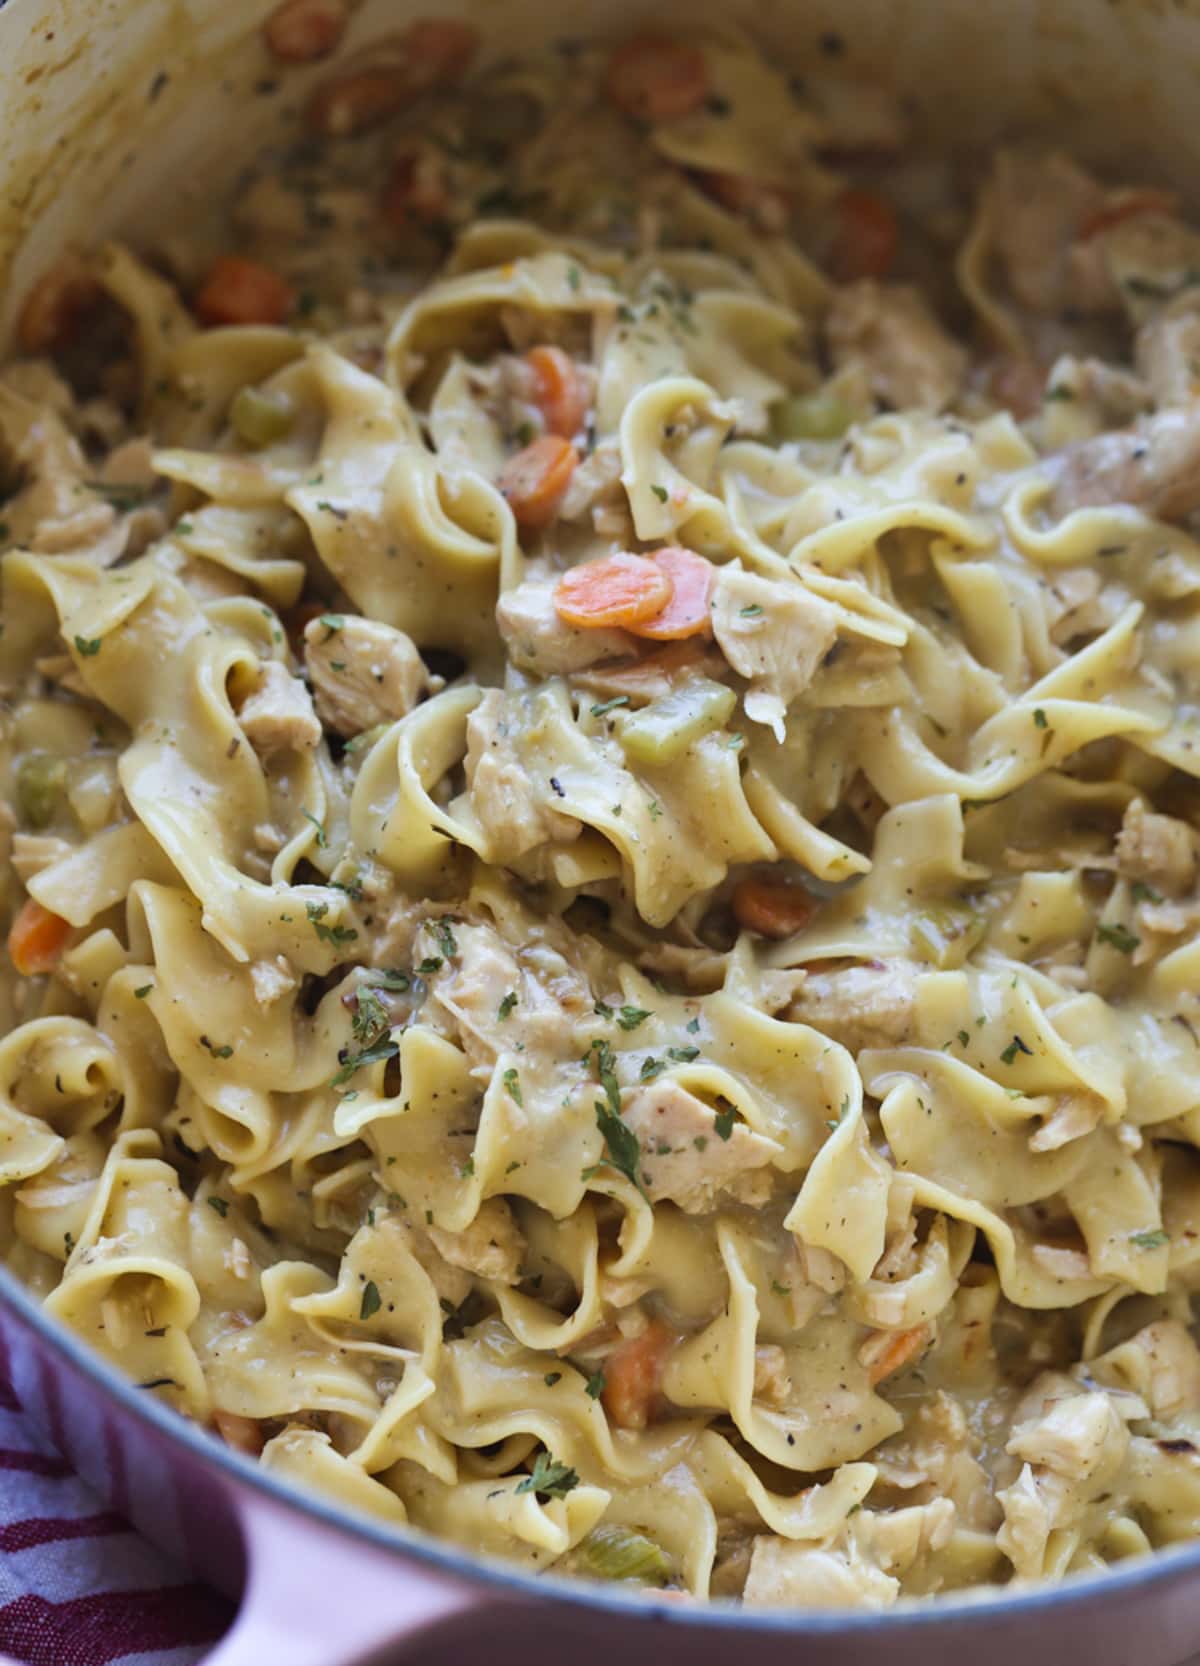 Egg noodles and chicken in a creamy sauce with carrots and seasoning